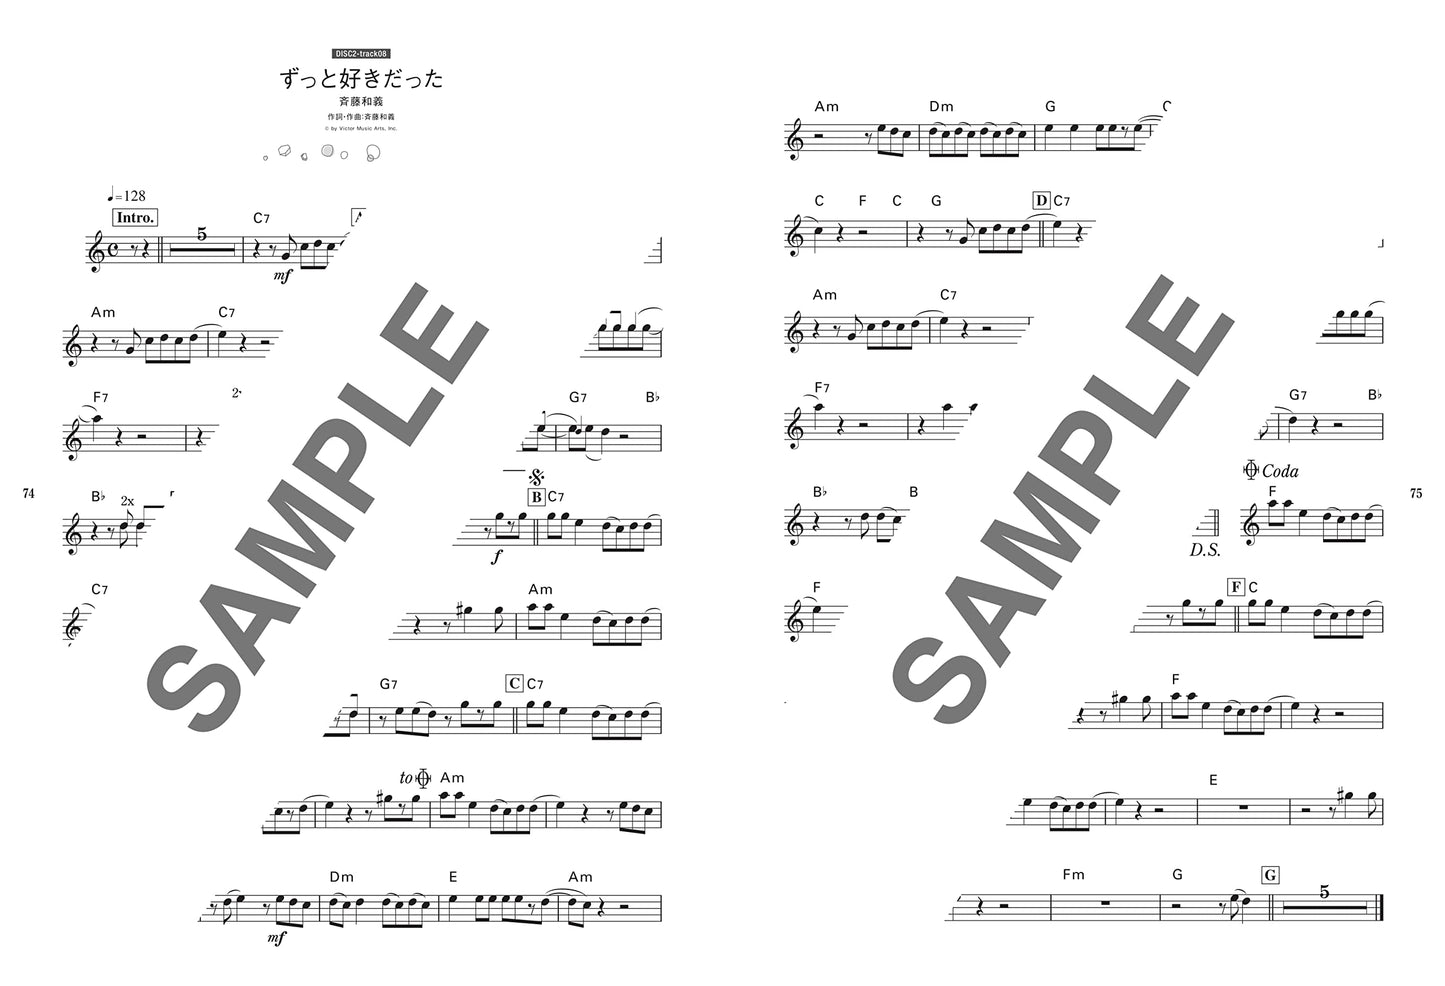 New and Standard J-POP for Clarinet Solo w/CD(Backing Tracks) (Upper-Intermediate) Sheet Music Book